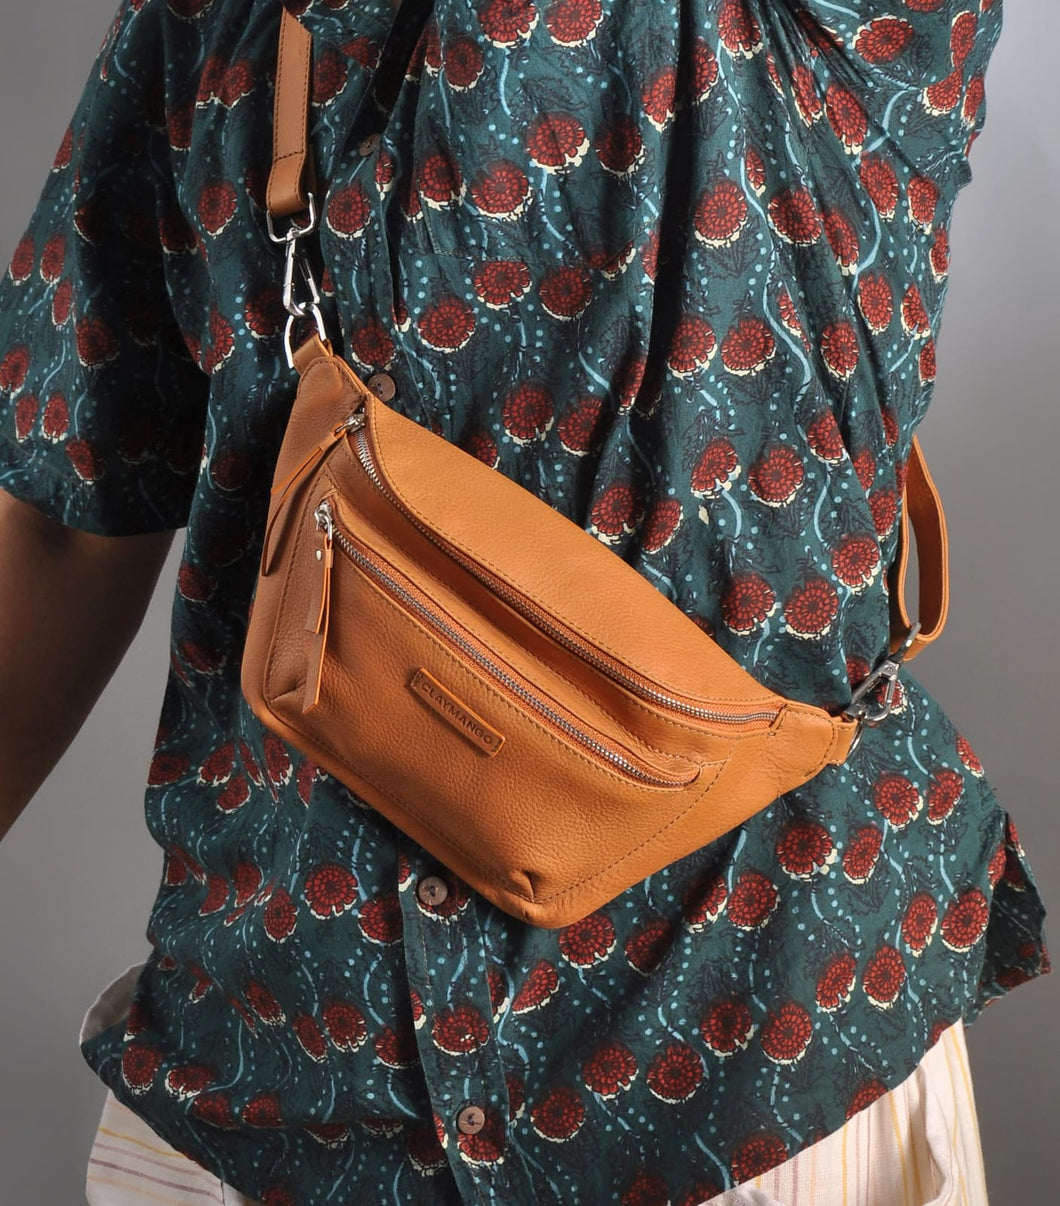 Foxtrot Tan - UNISEX Fanny pack | cross Bag _handcrafted out of genuine leather